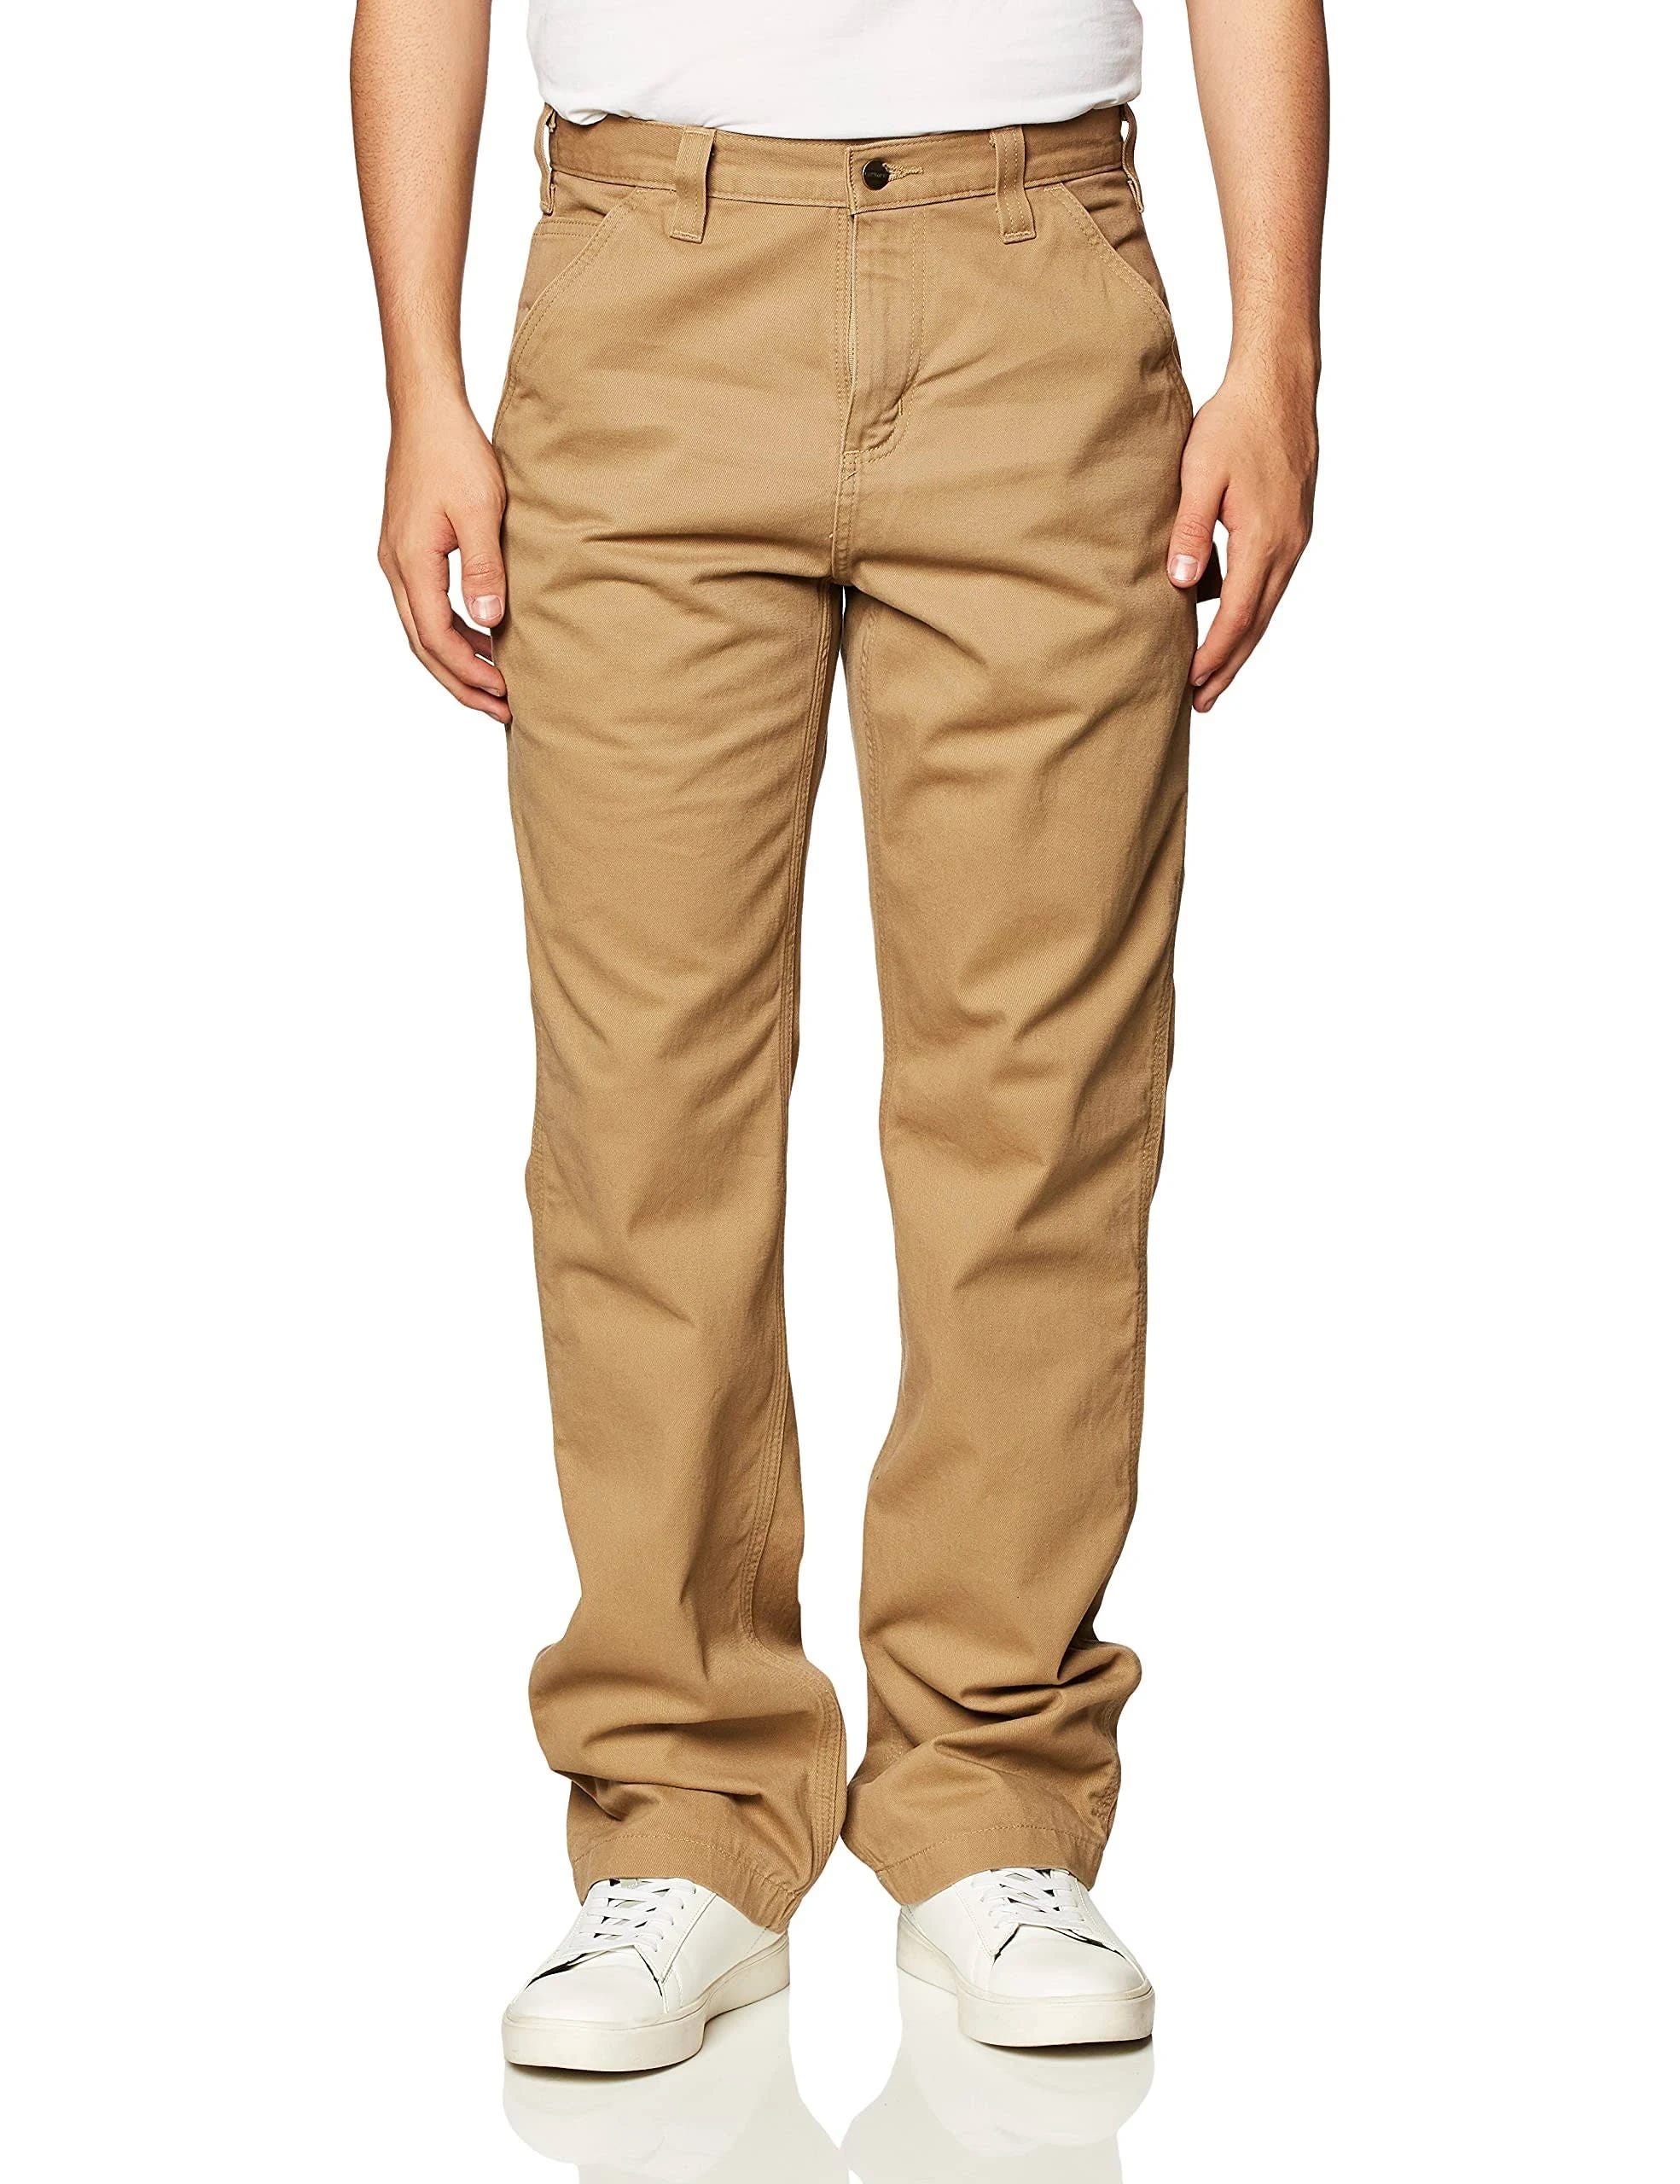 Relaxed Fit Khaki Work Pants with Tool Pockets and Hammer Loop | Image